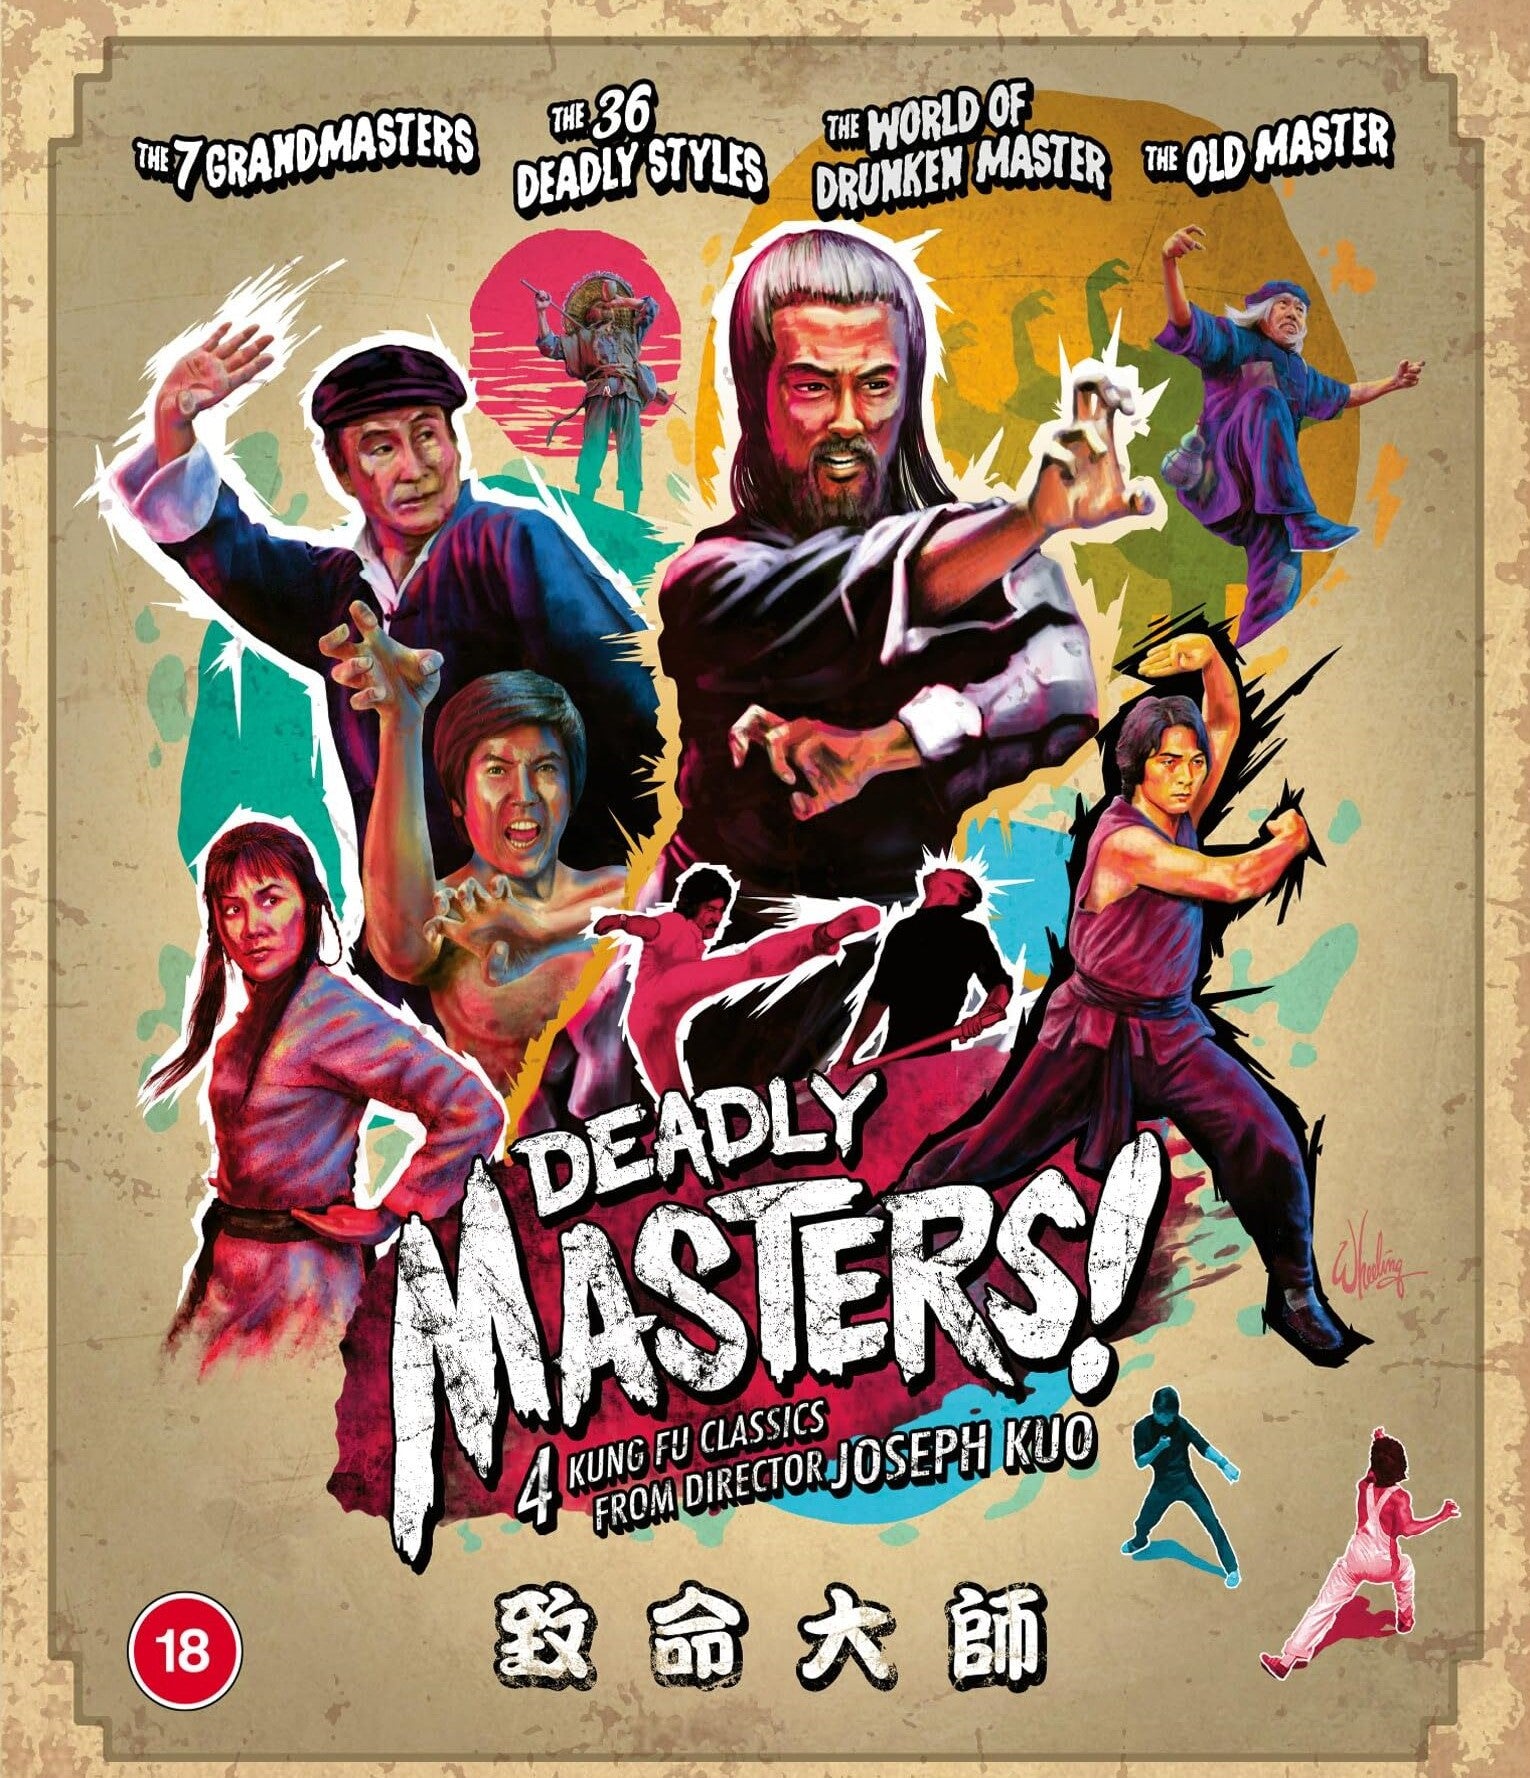 DEADLY MASTERS: 4 KUNG FU CLASSICS FROM DIRECTOR JOSEPH KUO (REGION B IMPORT) BLU-RAY